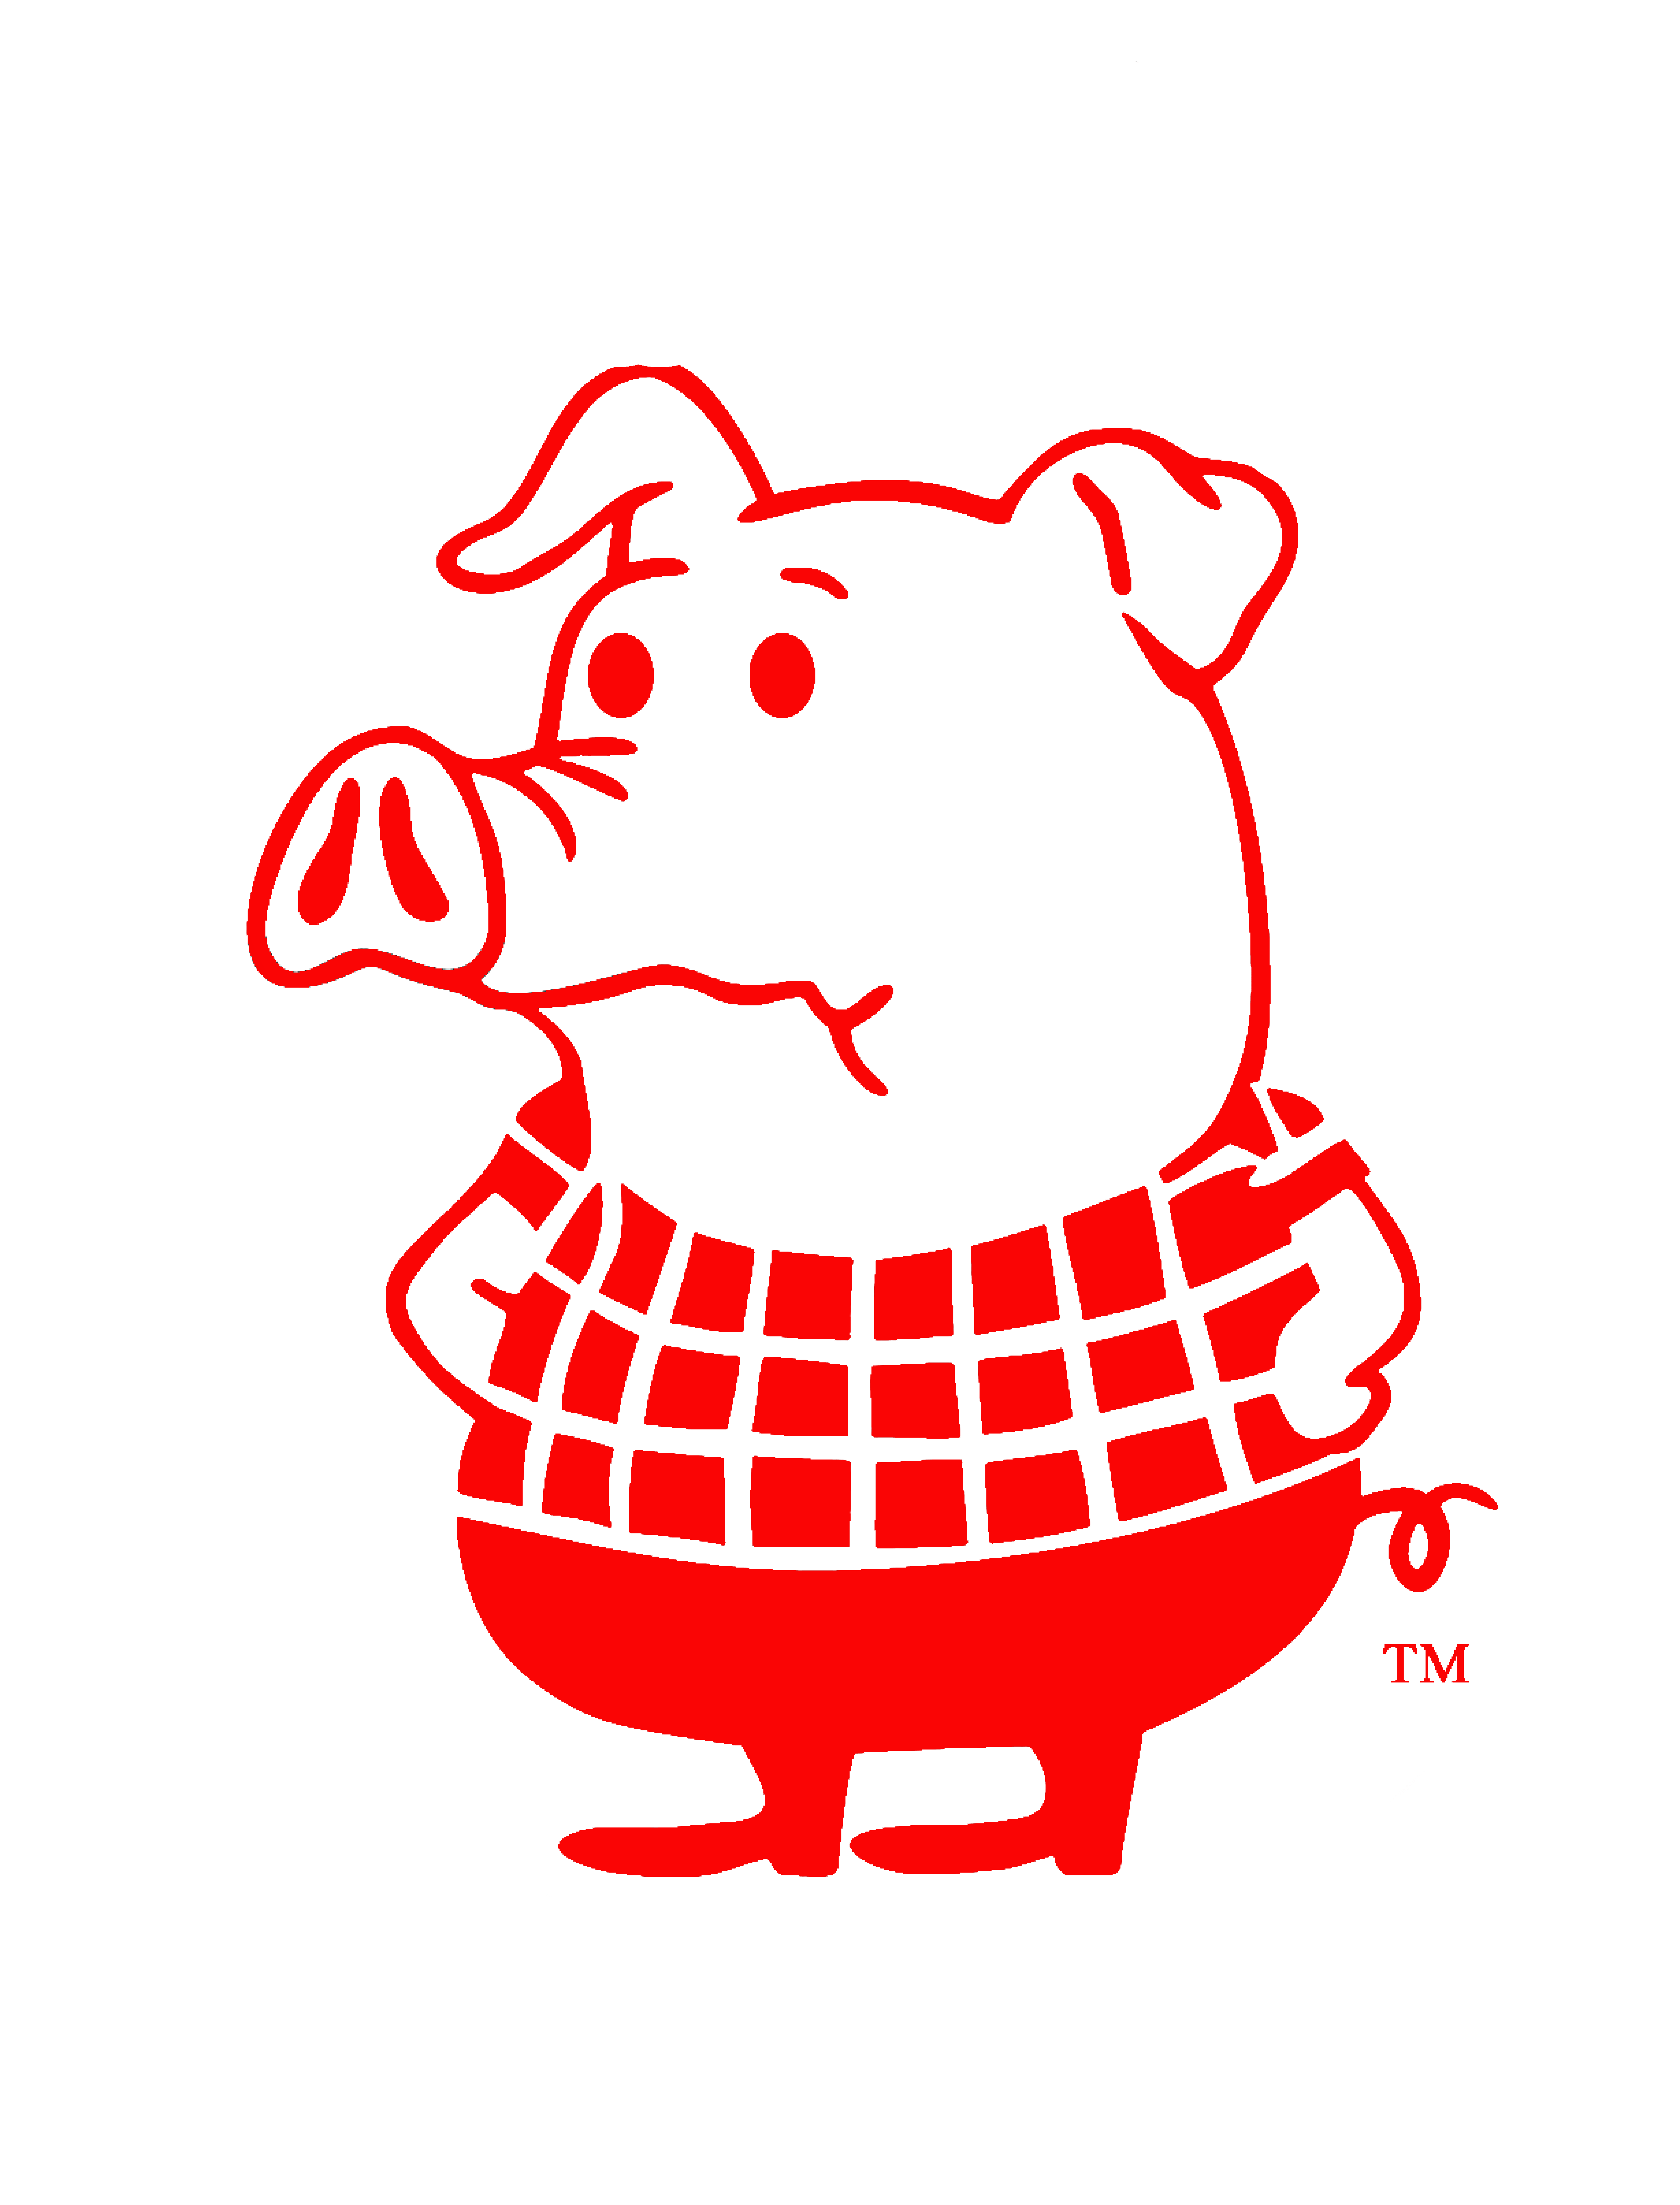 Red Pig Logo - The Red Pig